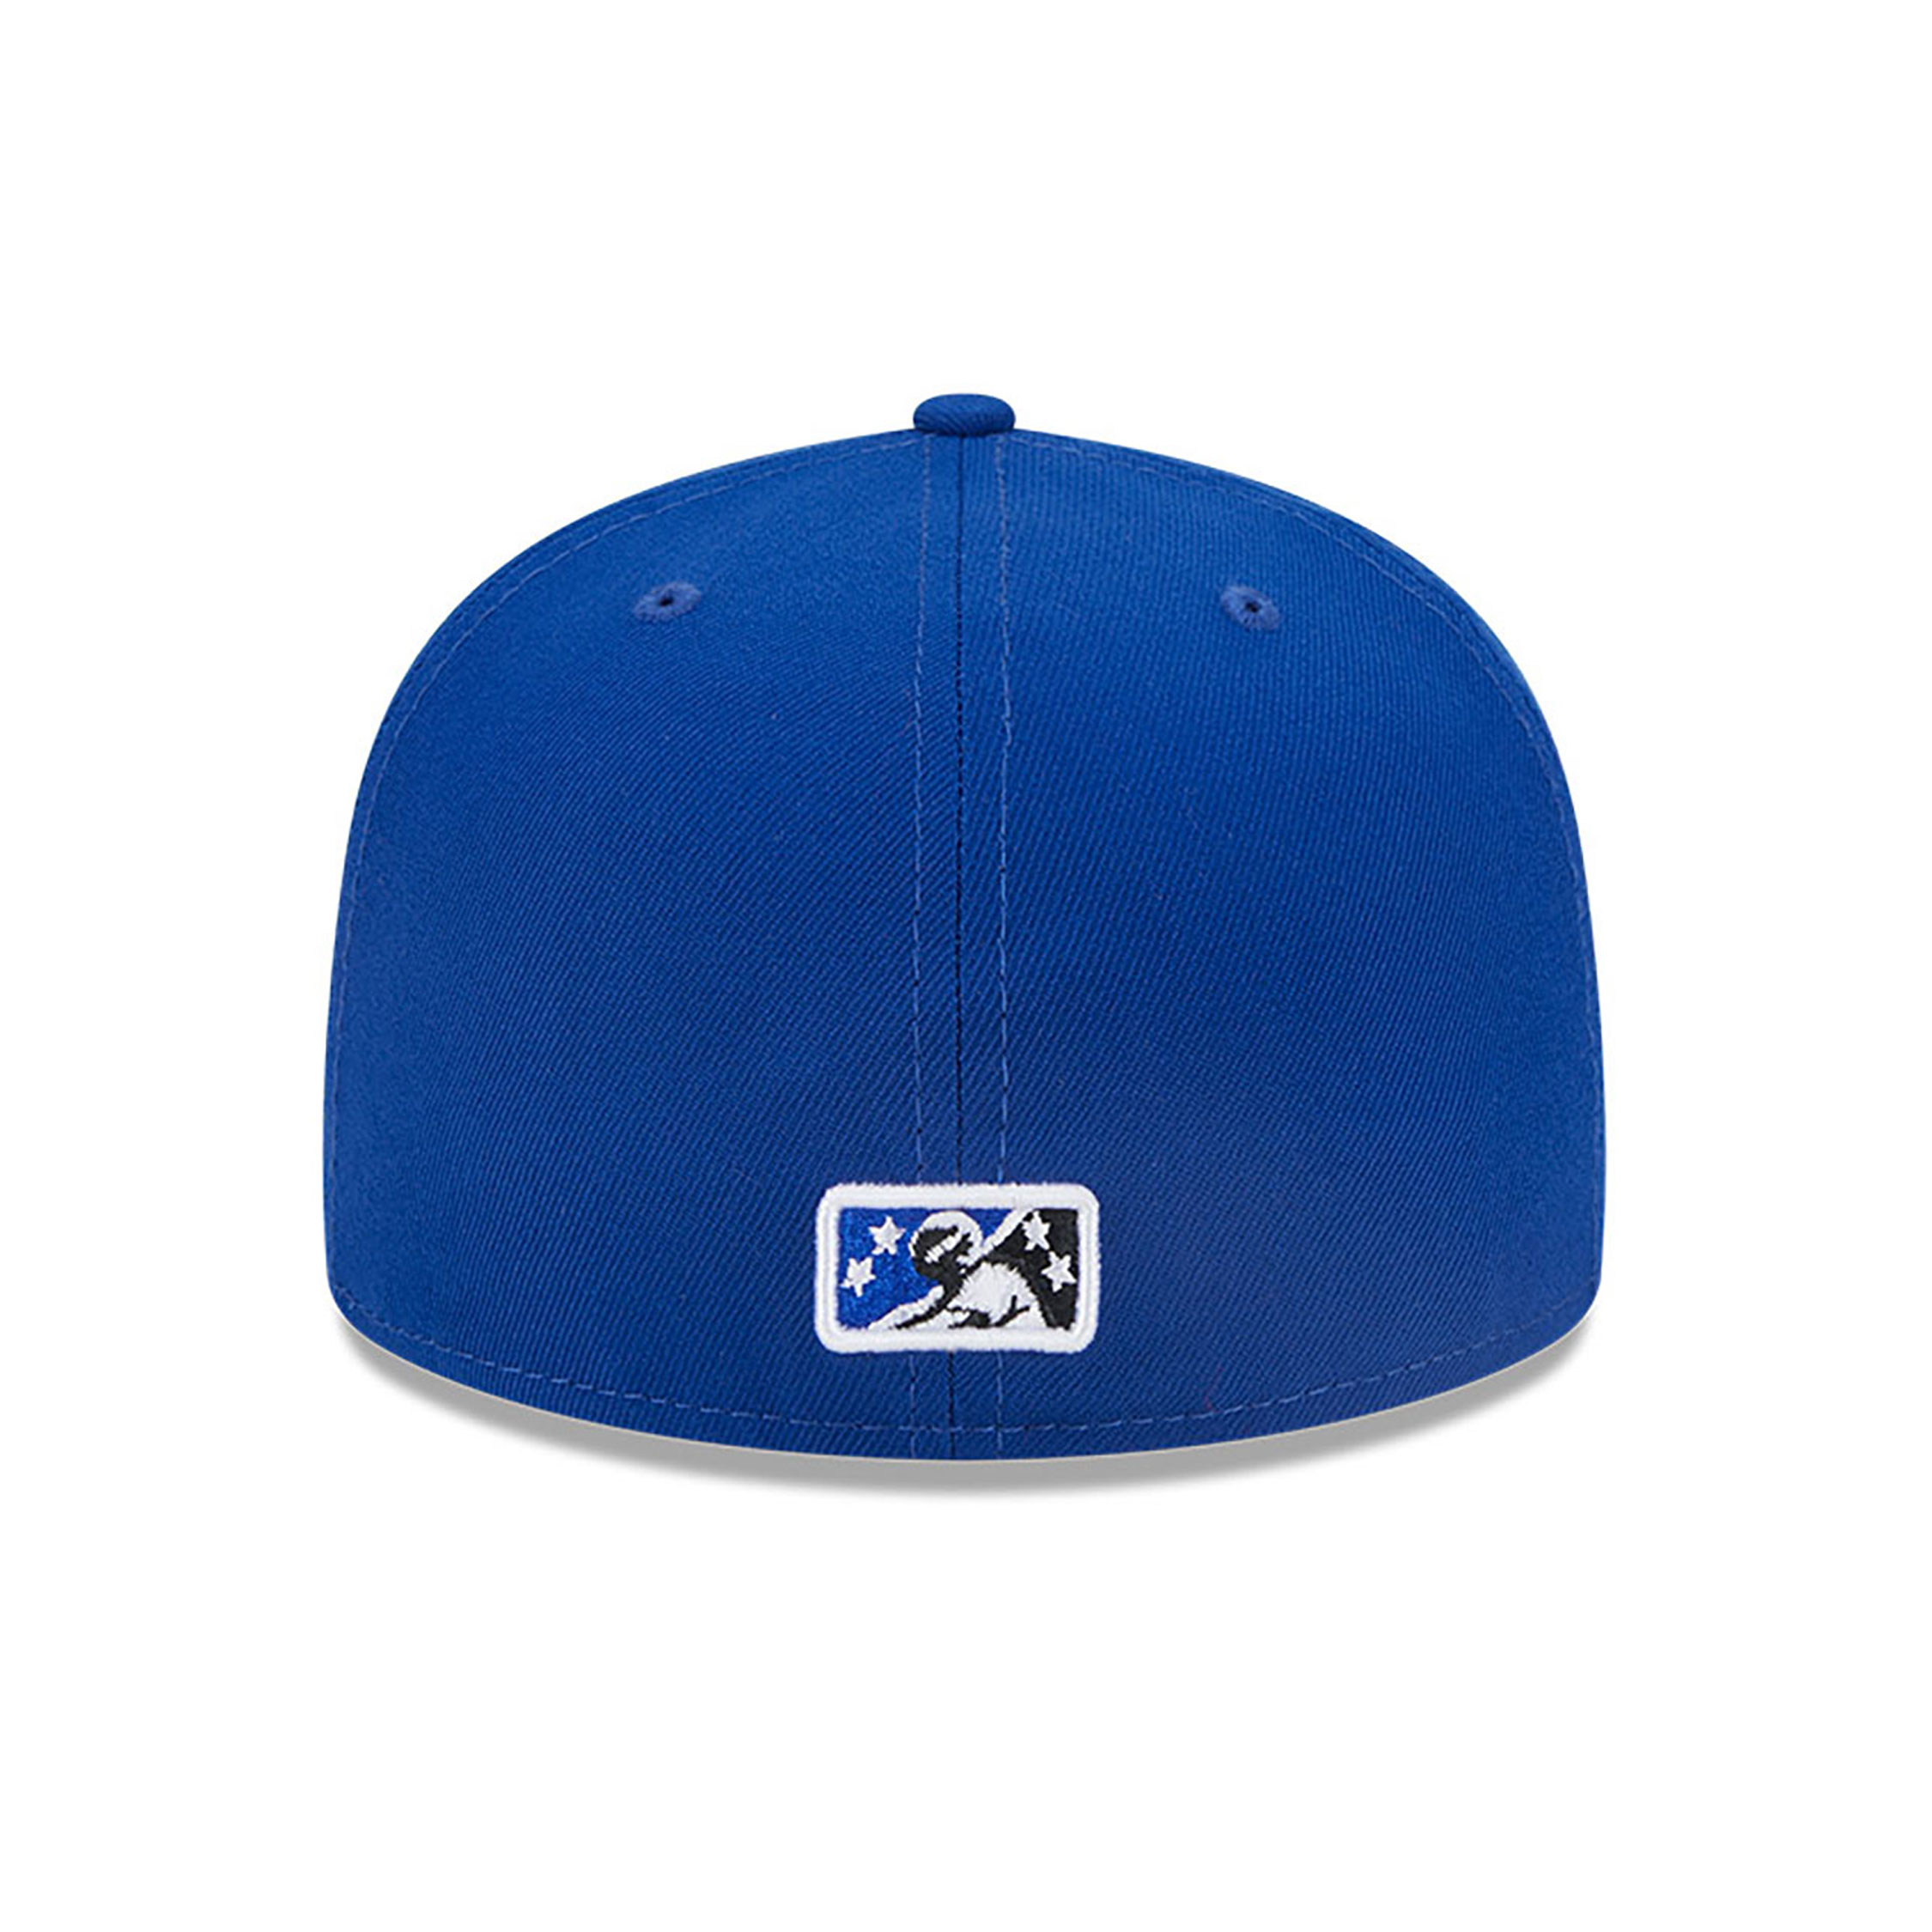 Omaha Storm Chasers MiLB On Field Blue 59FIFTY Fitted Cap